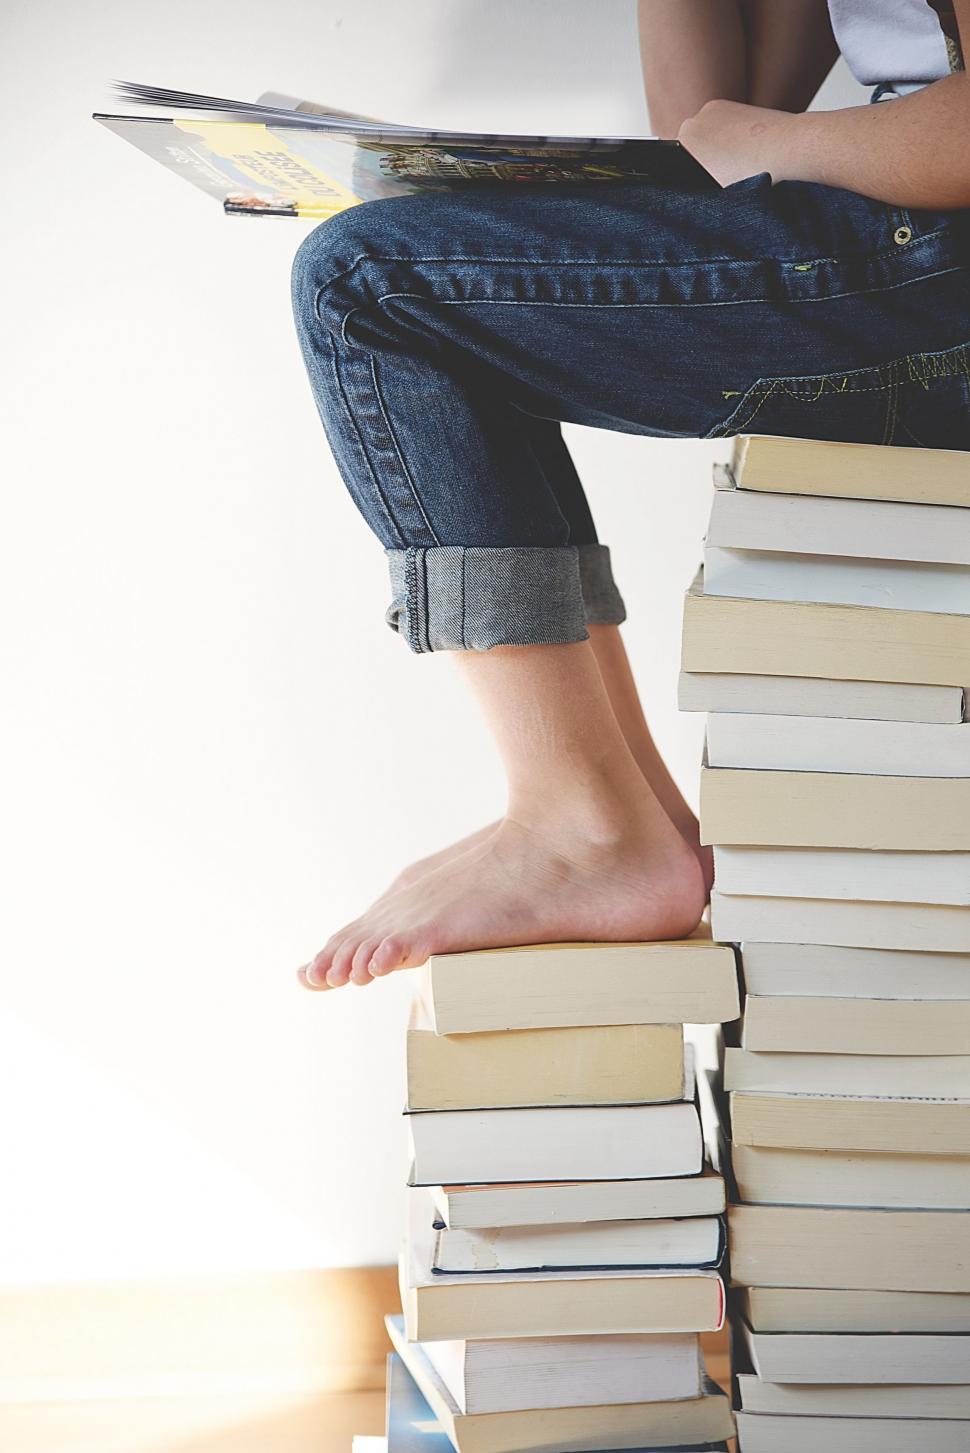 Free Image of Person Sitting on Top of a Stack of Books 